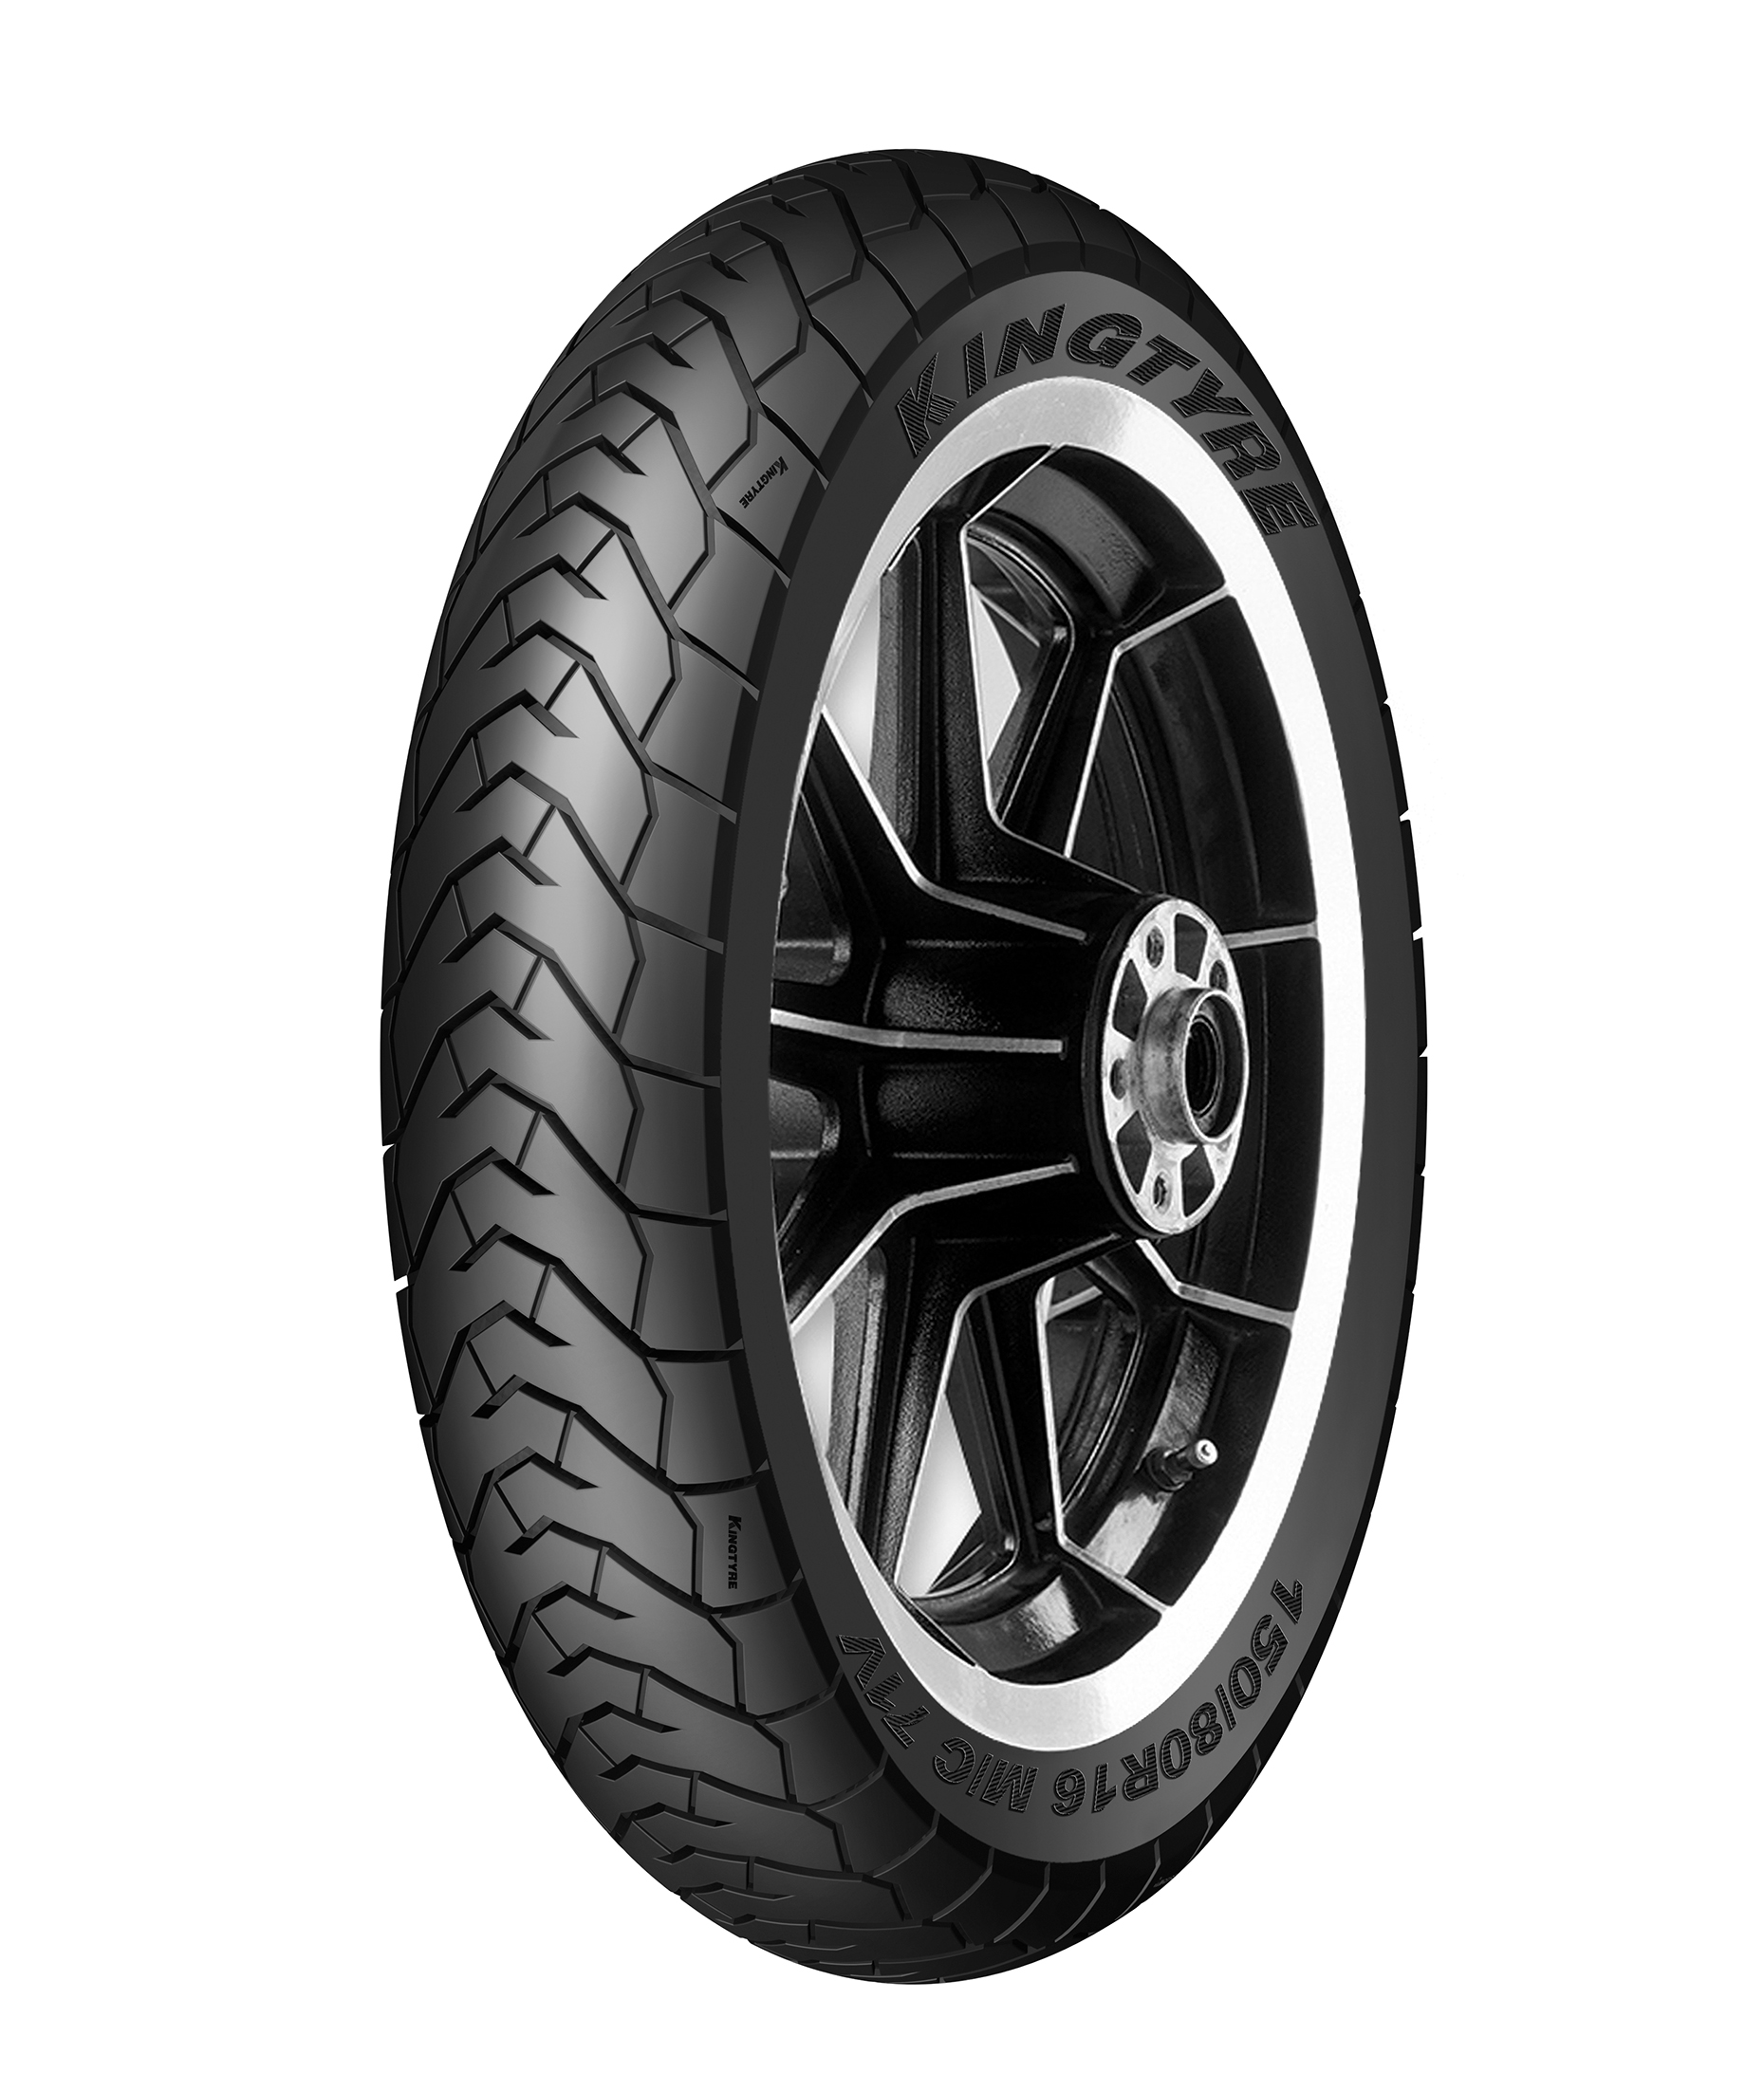 Wholesale Discount Tire Suppliers -
 ON ROAD RADIAL TYRE K70 – Willing